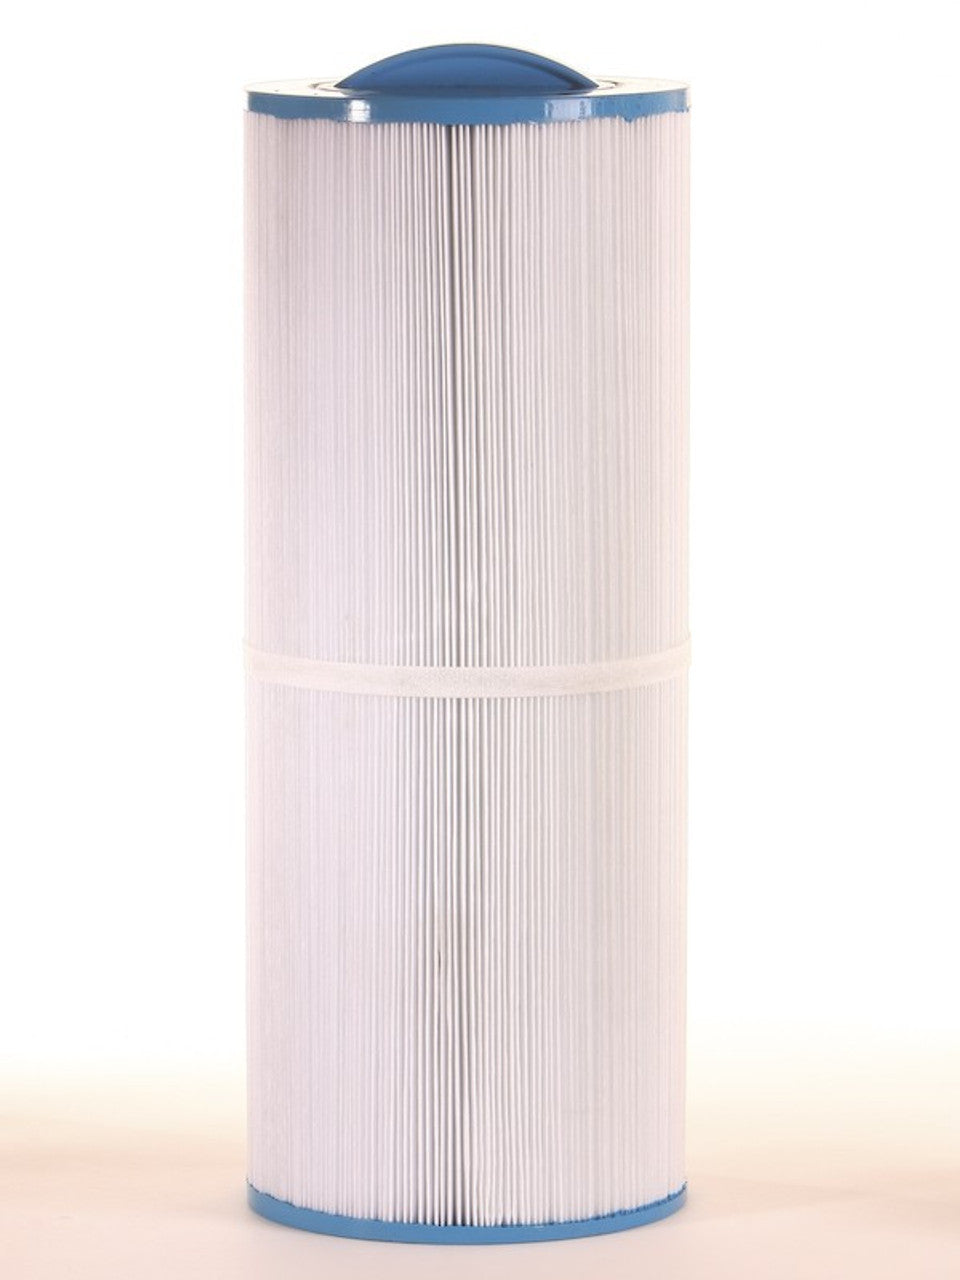 Baleen AK-5009 Filter Cartridge Replaces PTL50W-P4, C-6475 and FC-3089